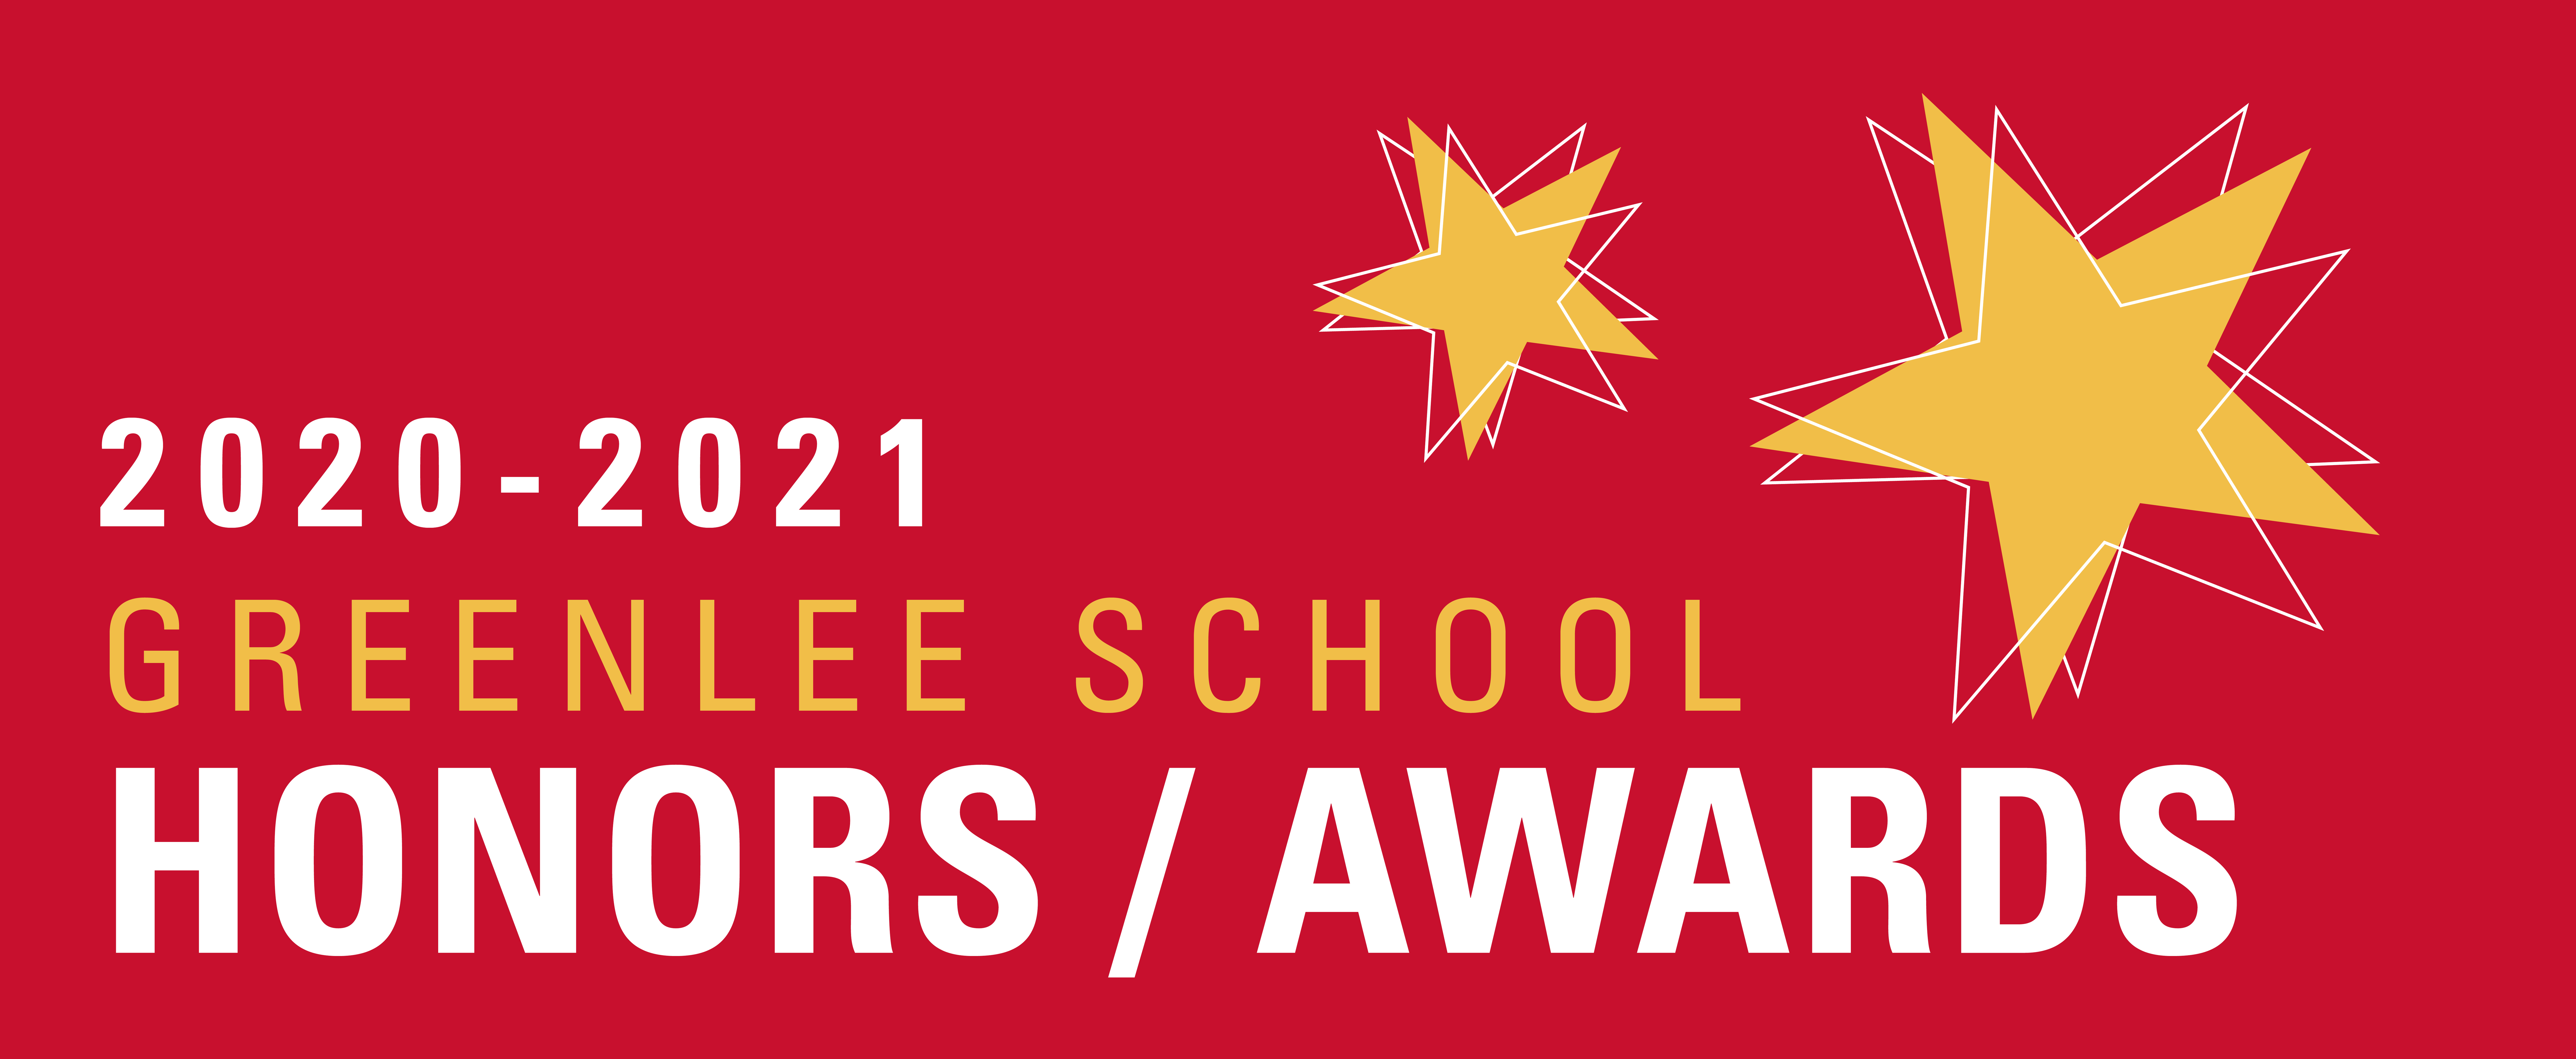 2020-2021 Greenlee School Honors/Awards graphic